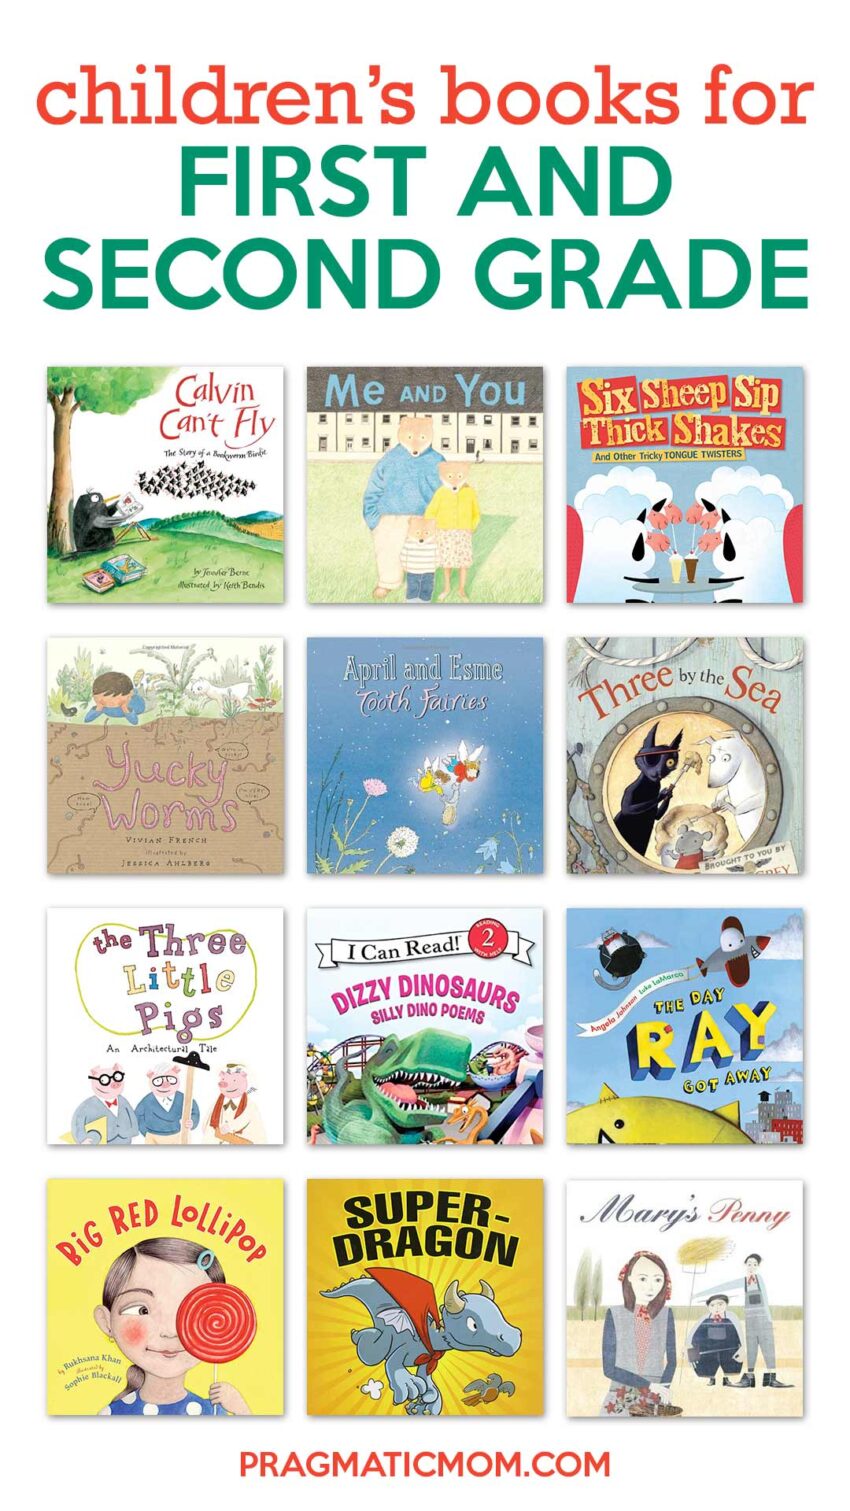 Books for First Grade and Second Grade